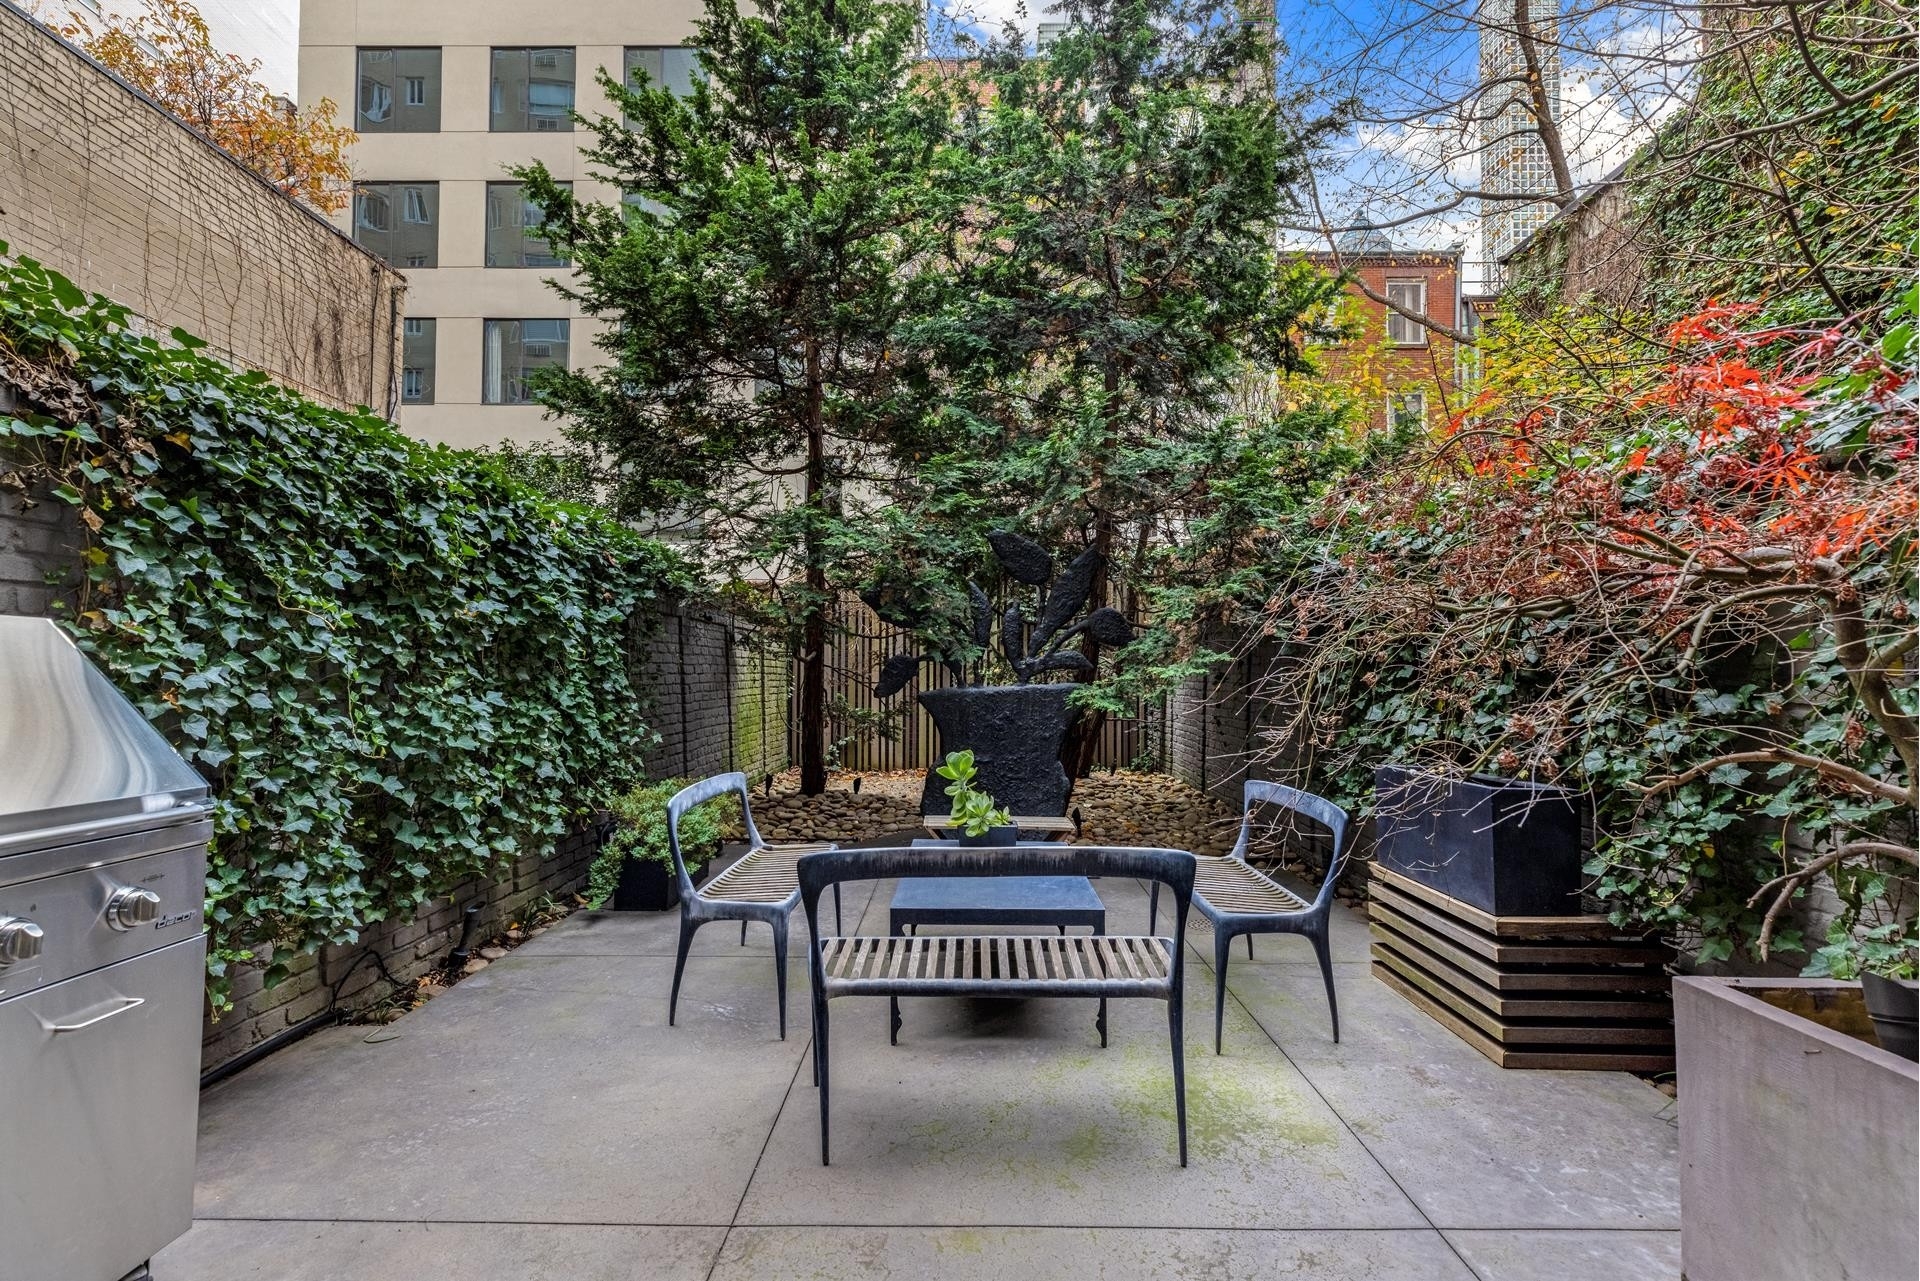 8. Single Family Townhouse for Sale at 160 E 63RD ST, TOWNHOUSE Lenox Hill, New York, NY 10065